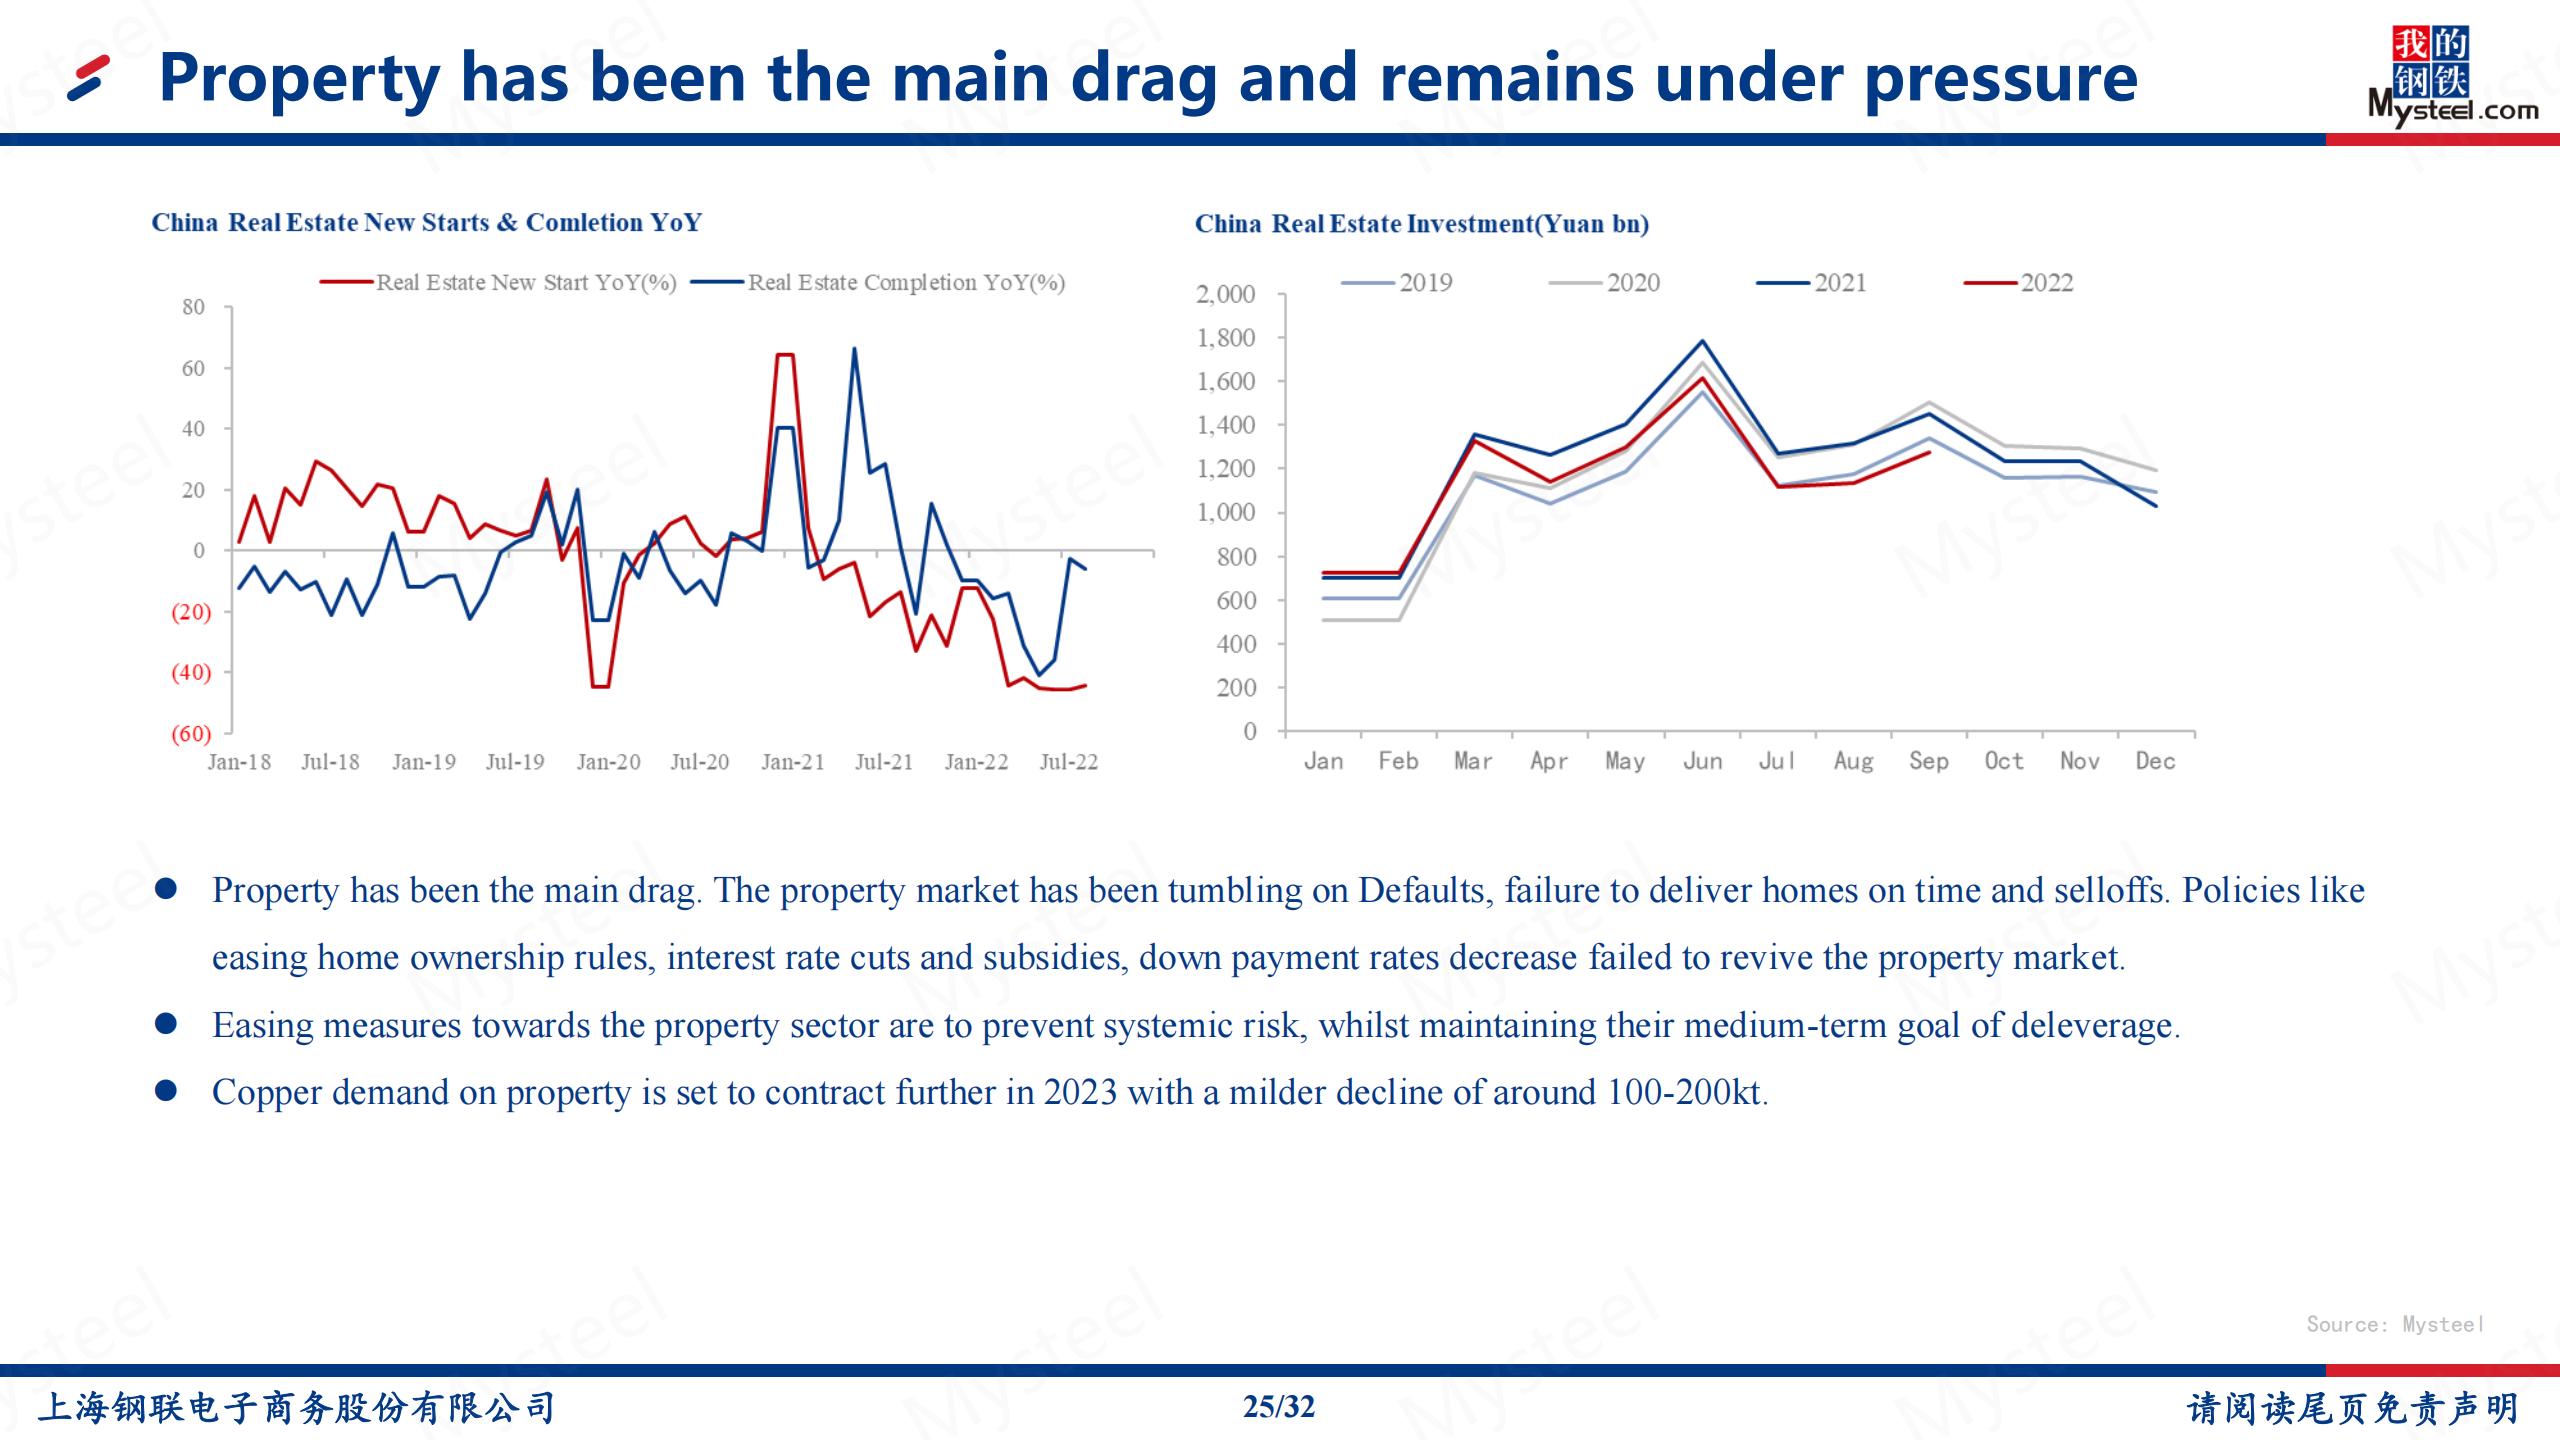 China real estate and property market